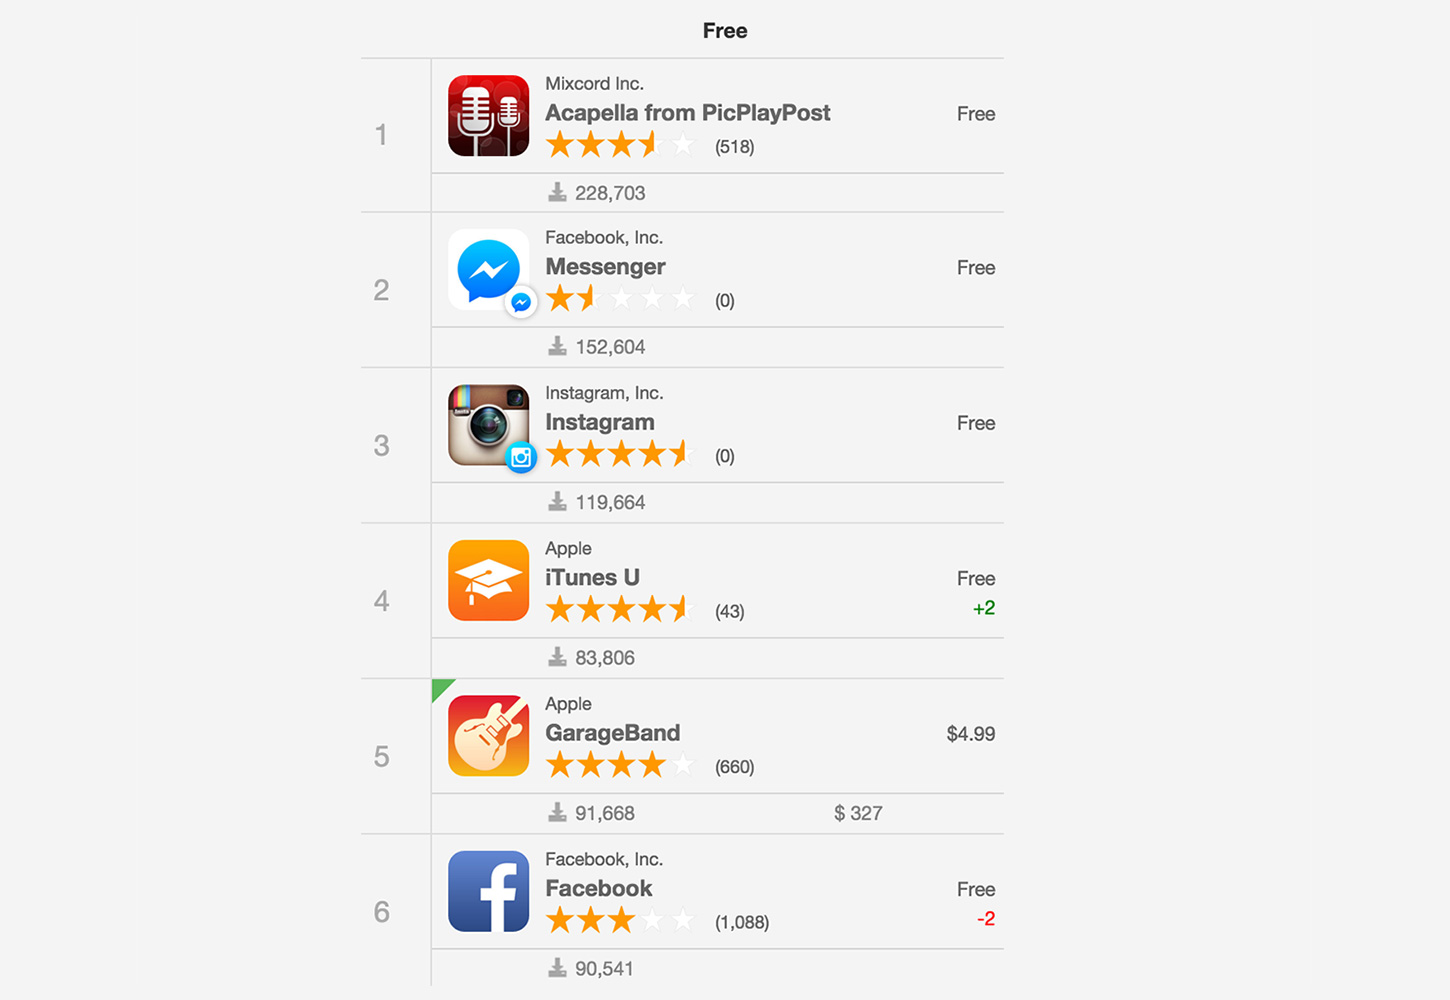 App Store Anomaly: Investigating Apple Apps Behavior on the Top Free Charts